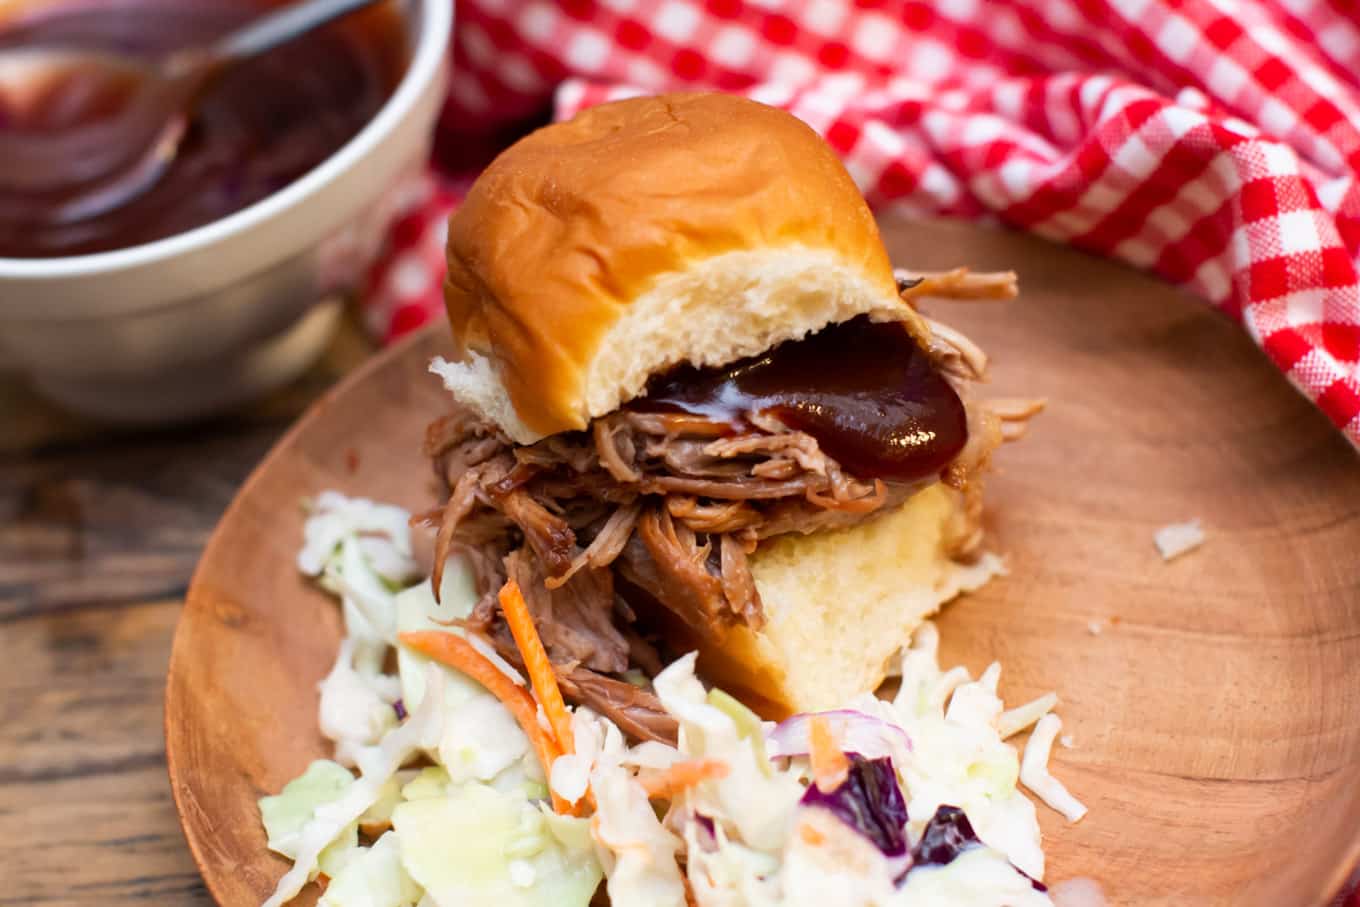 pulled pork sandwich topped with barbecue sauce and coleslaw on the side